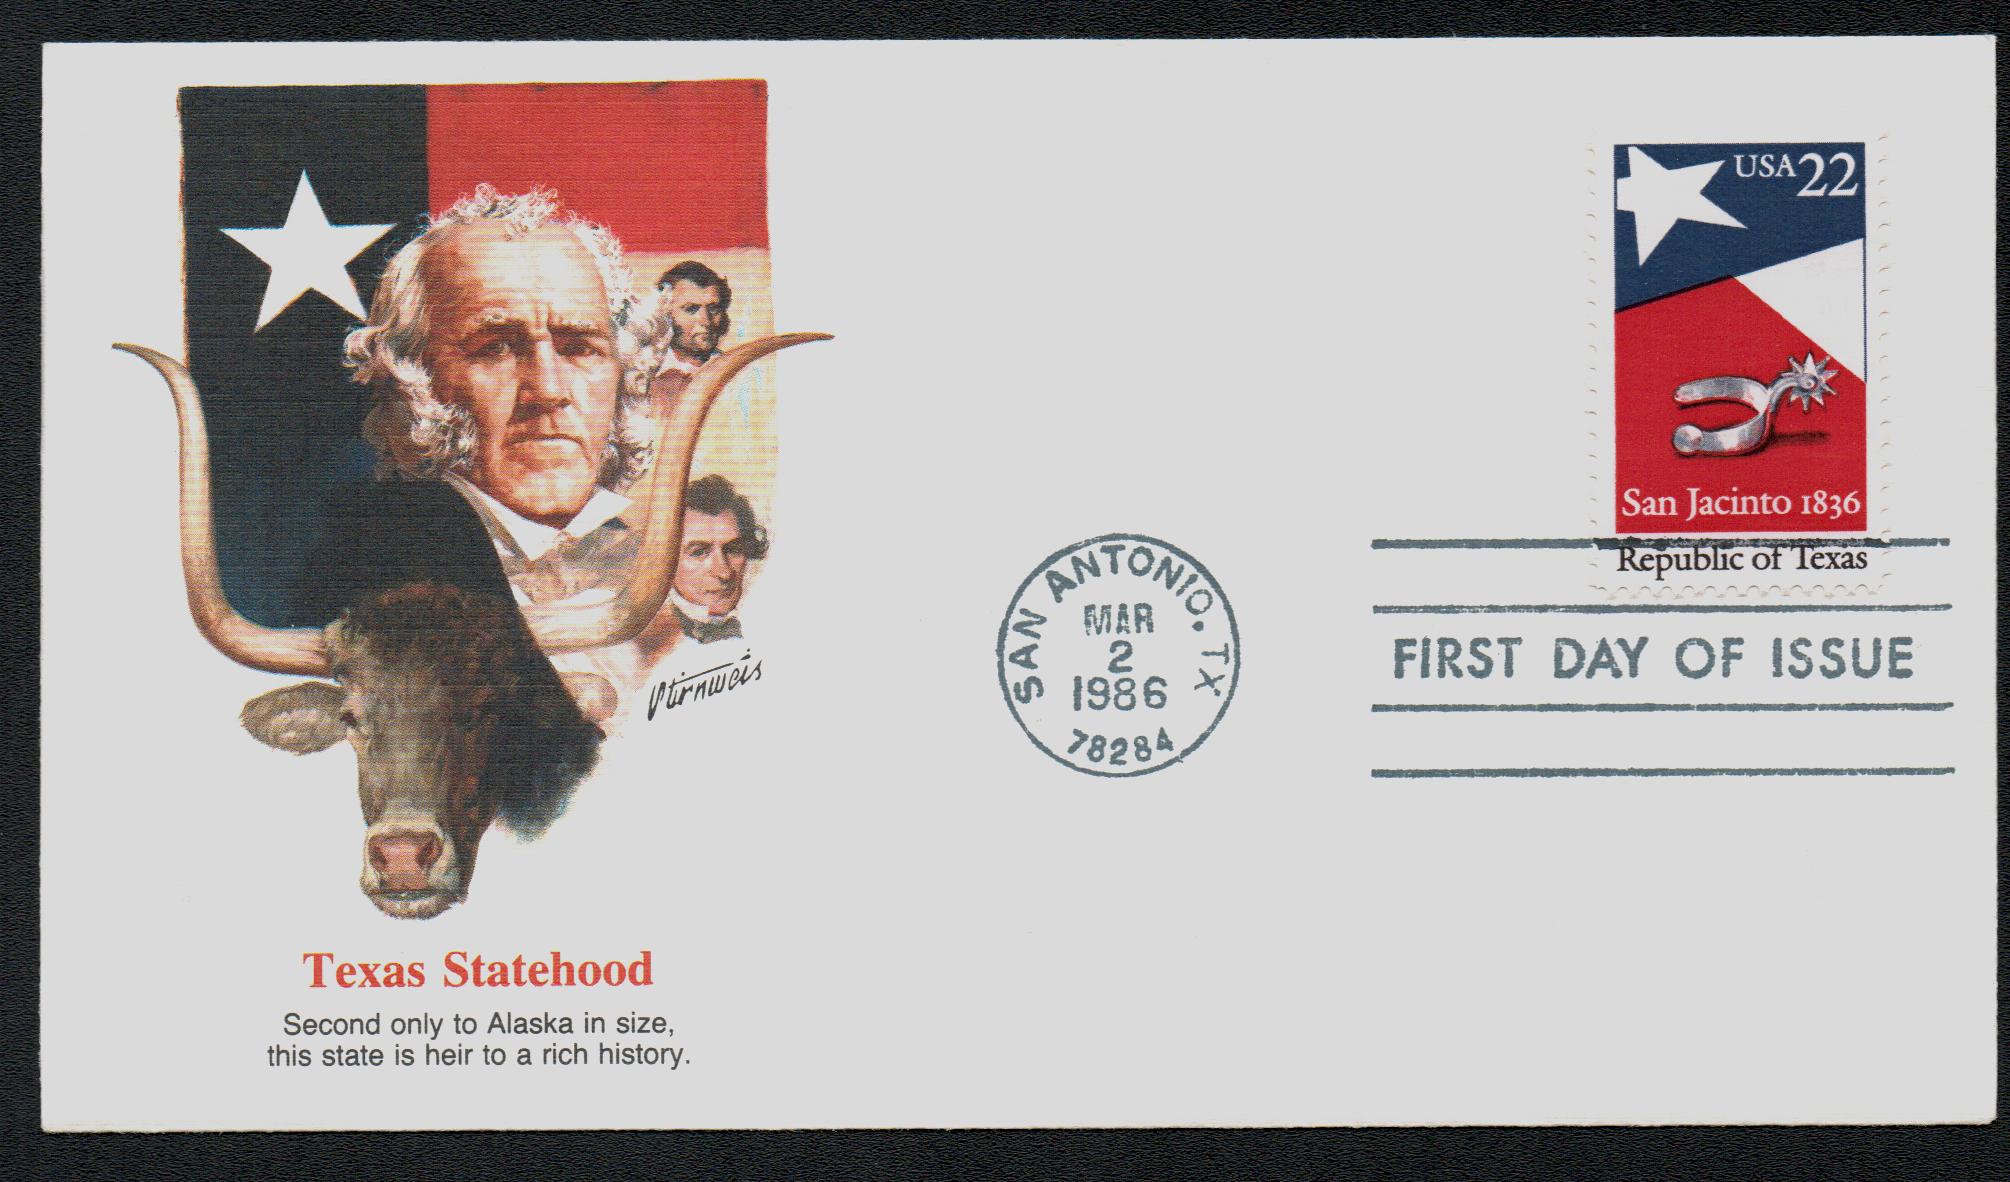 U.S. #2204 FDC – Republic of Texas First Day Cover.